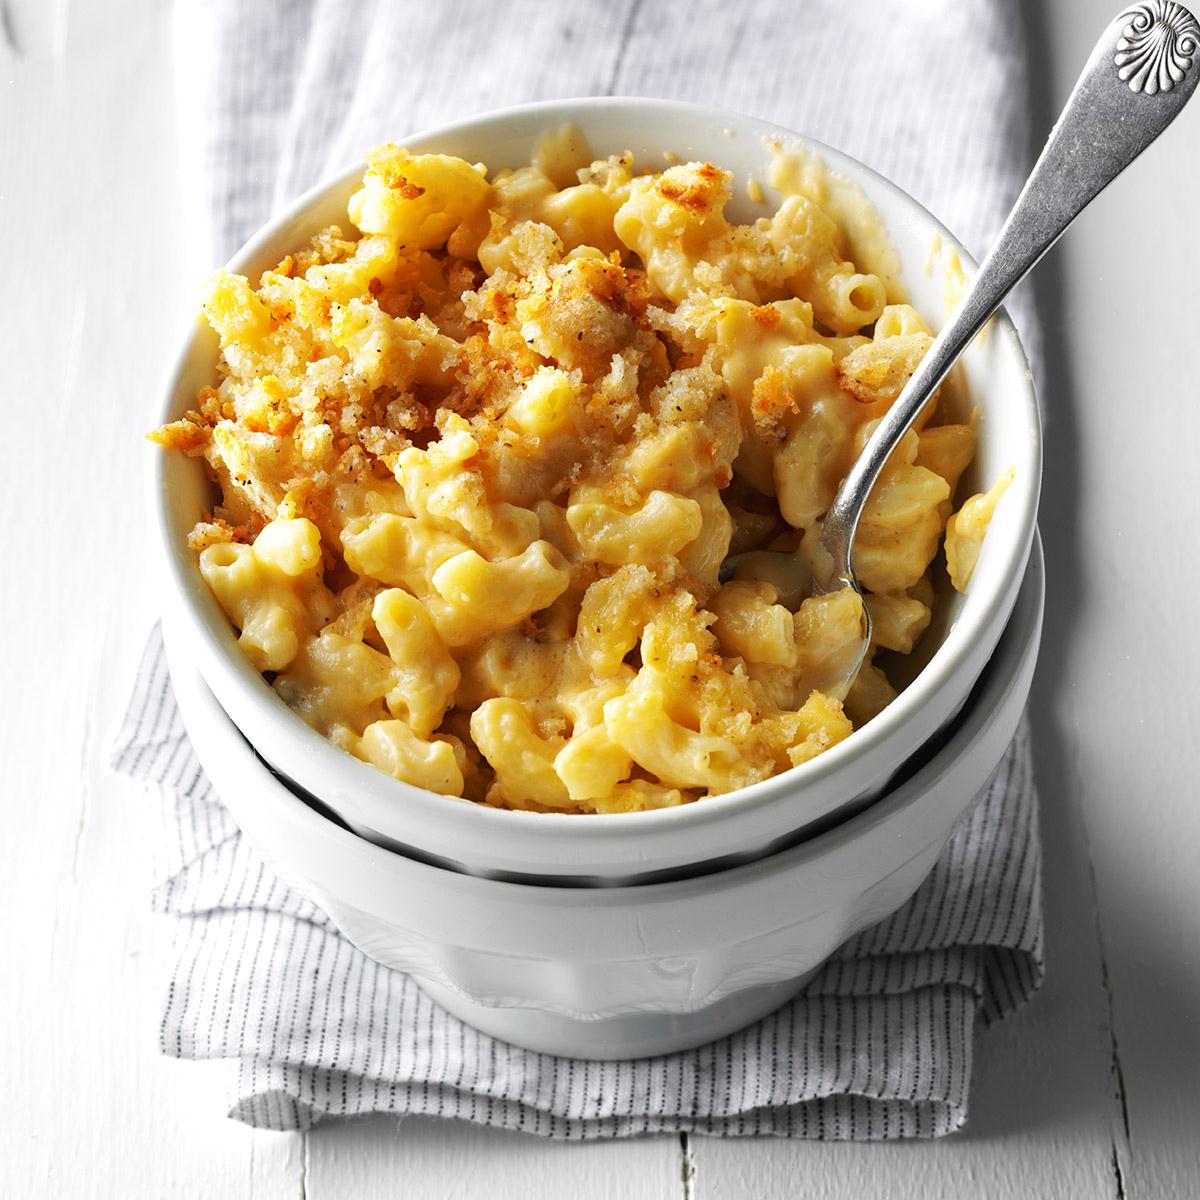 Recipes For Mac & Cheese